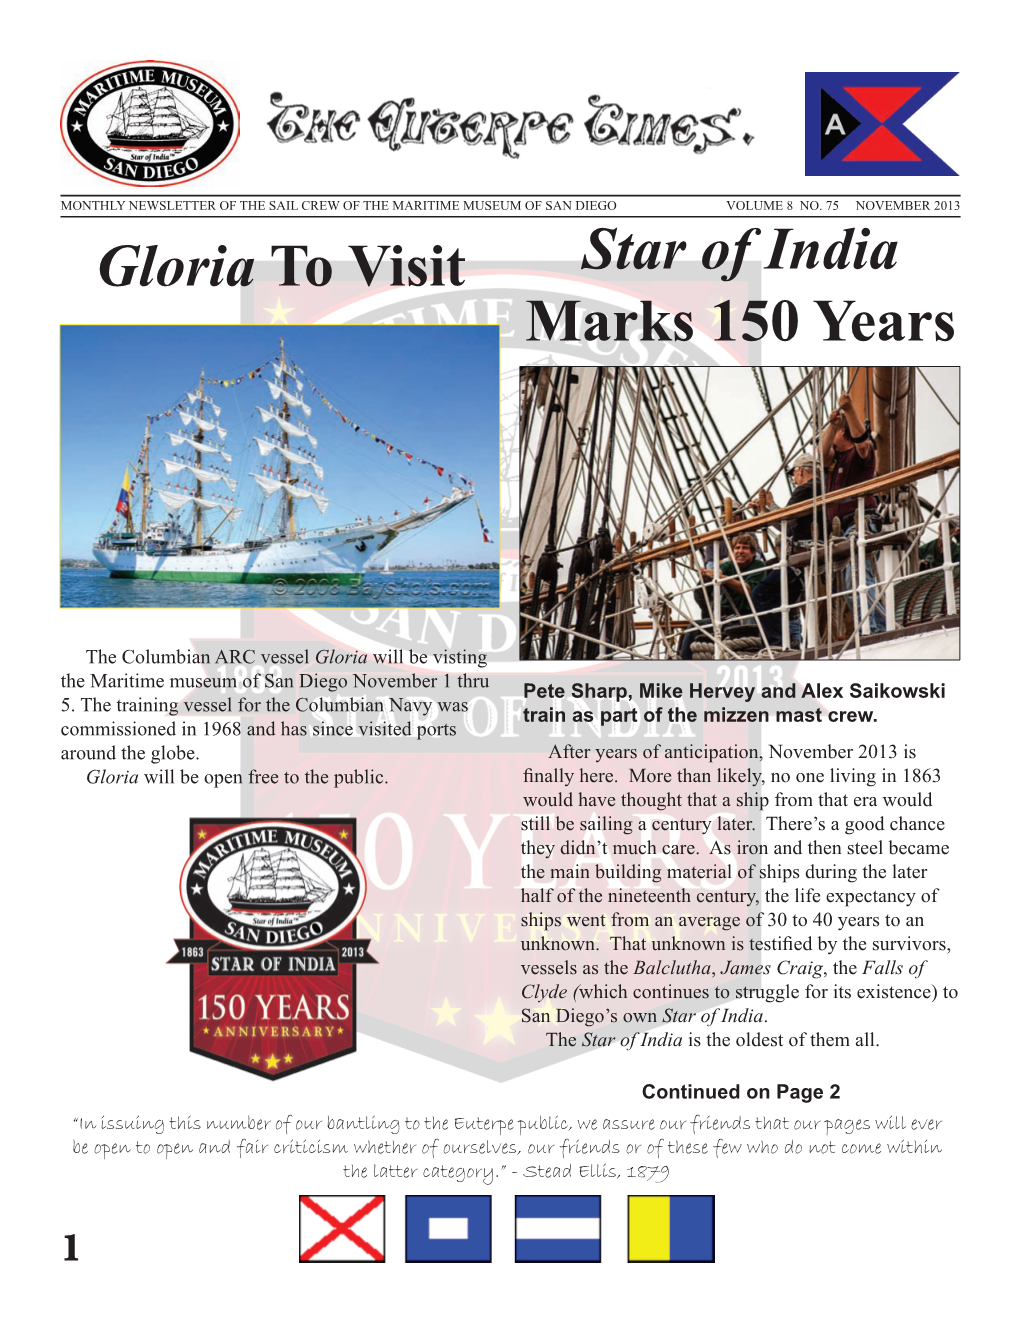 Star of India Marks 150 Years Gloria to Visit